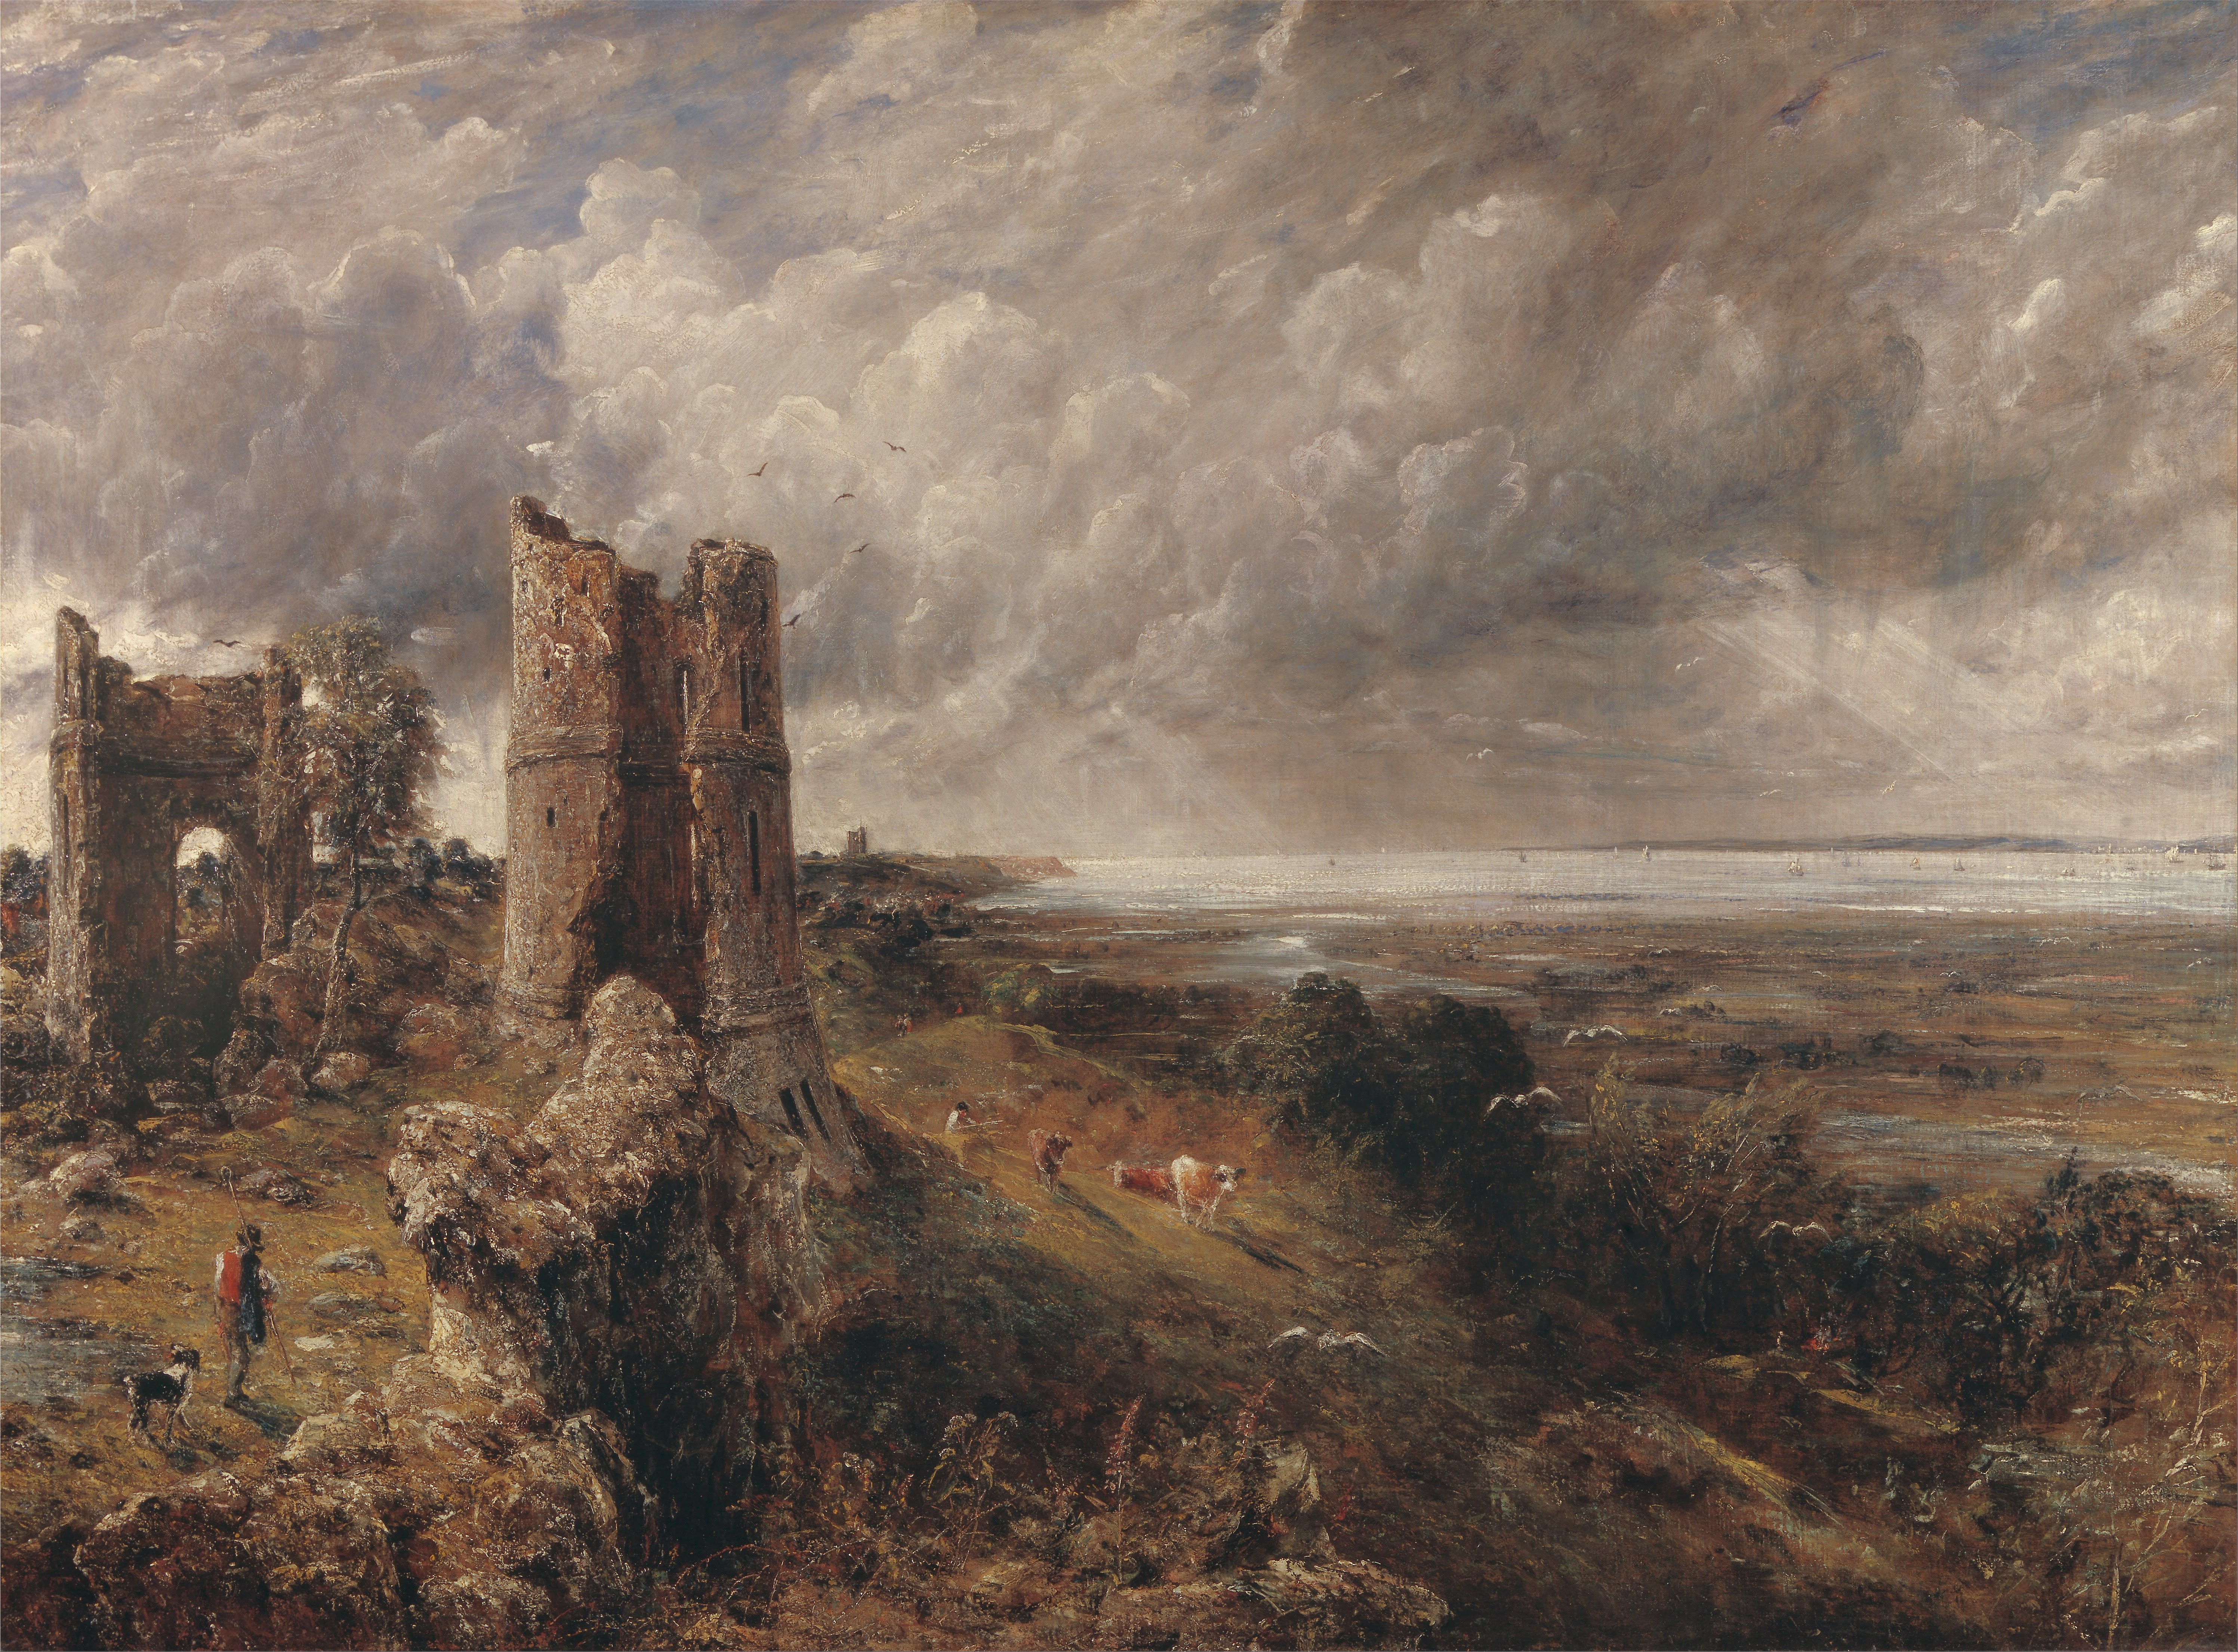 https://upload.wikimedia.org/wikipedia/commons/f/f8/John_Constable_-_Hadleigh_Castle%2C_The_Mouth_of_the_Thames--Morning_after_a_Stormy_Night_-_Google_Art_Project.jpg